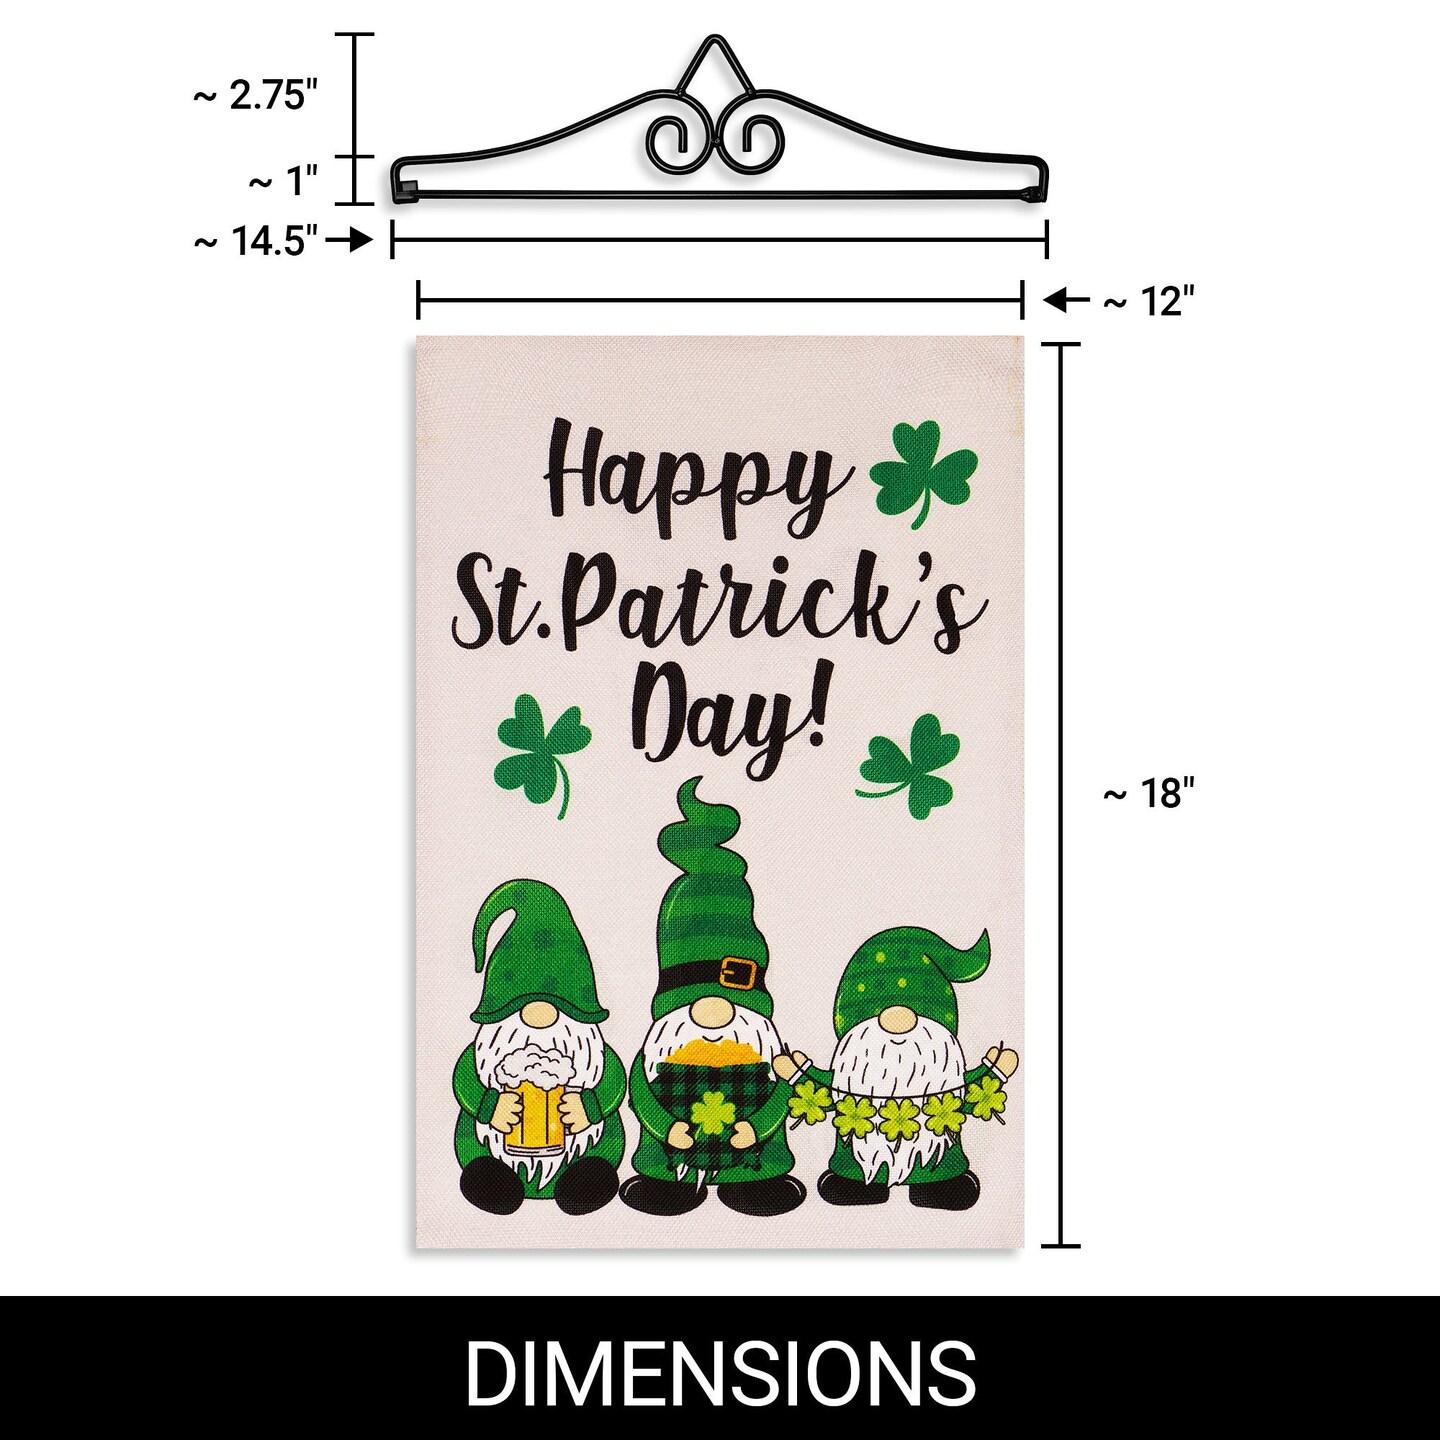 G128 Combo Pack Garden Flag Hanger 14IN &#x26; Garden Flag Happy St. Patrick&#x27;s Day 3 Leprechaun Gnomes 12x18IN Printed Double Sided Burlap Fabric